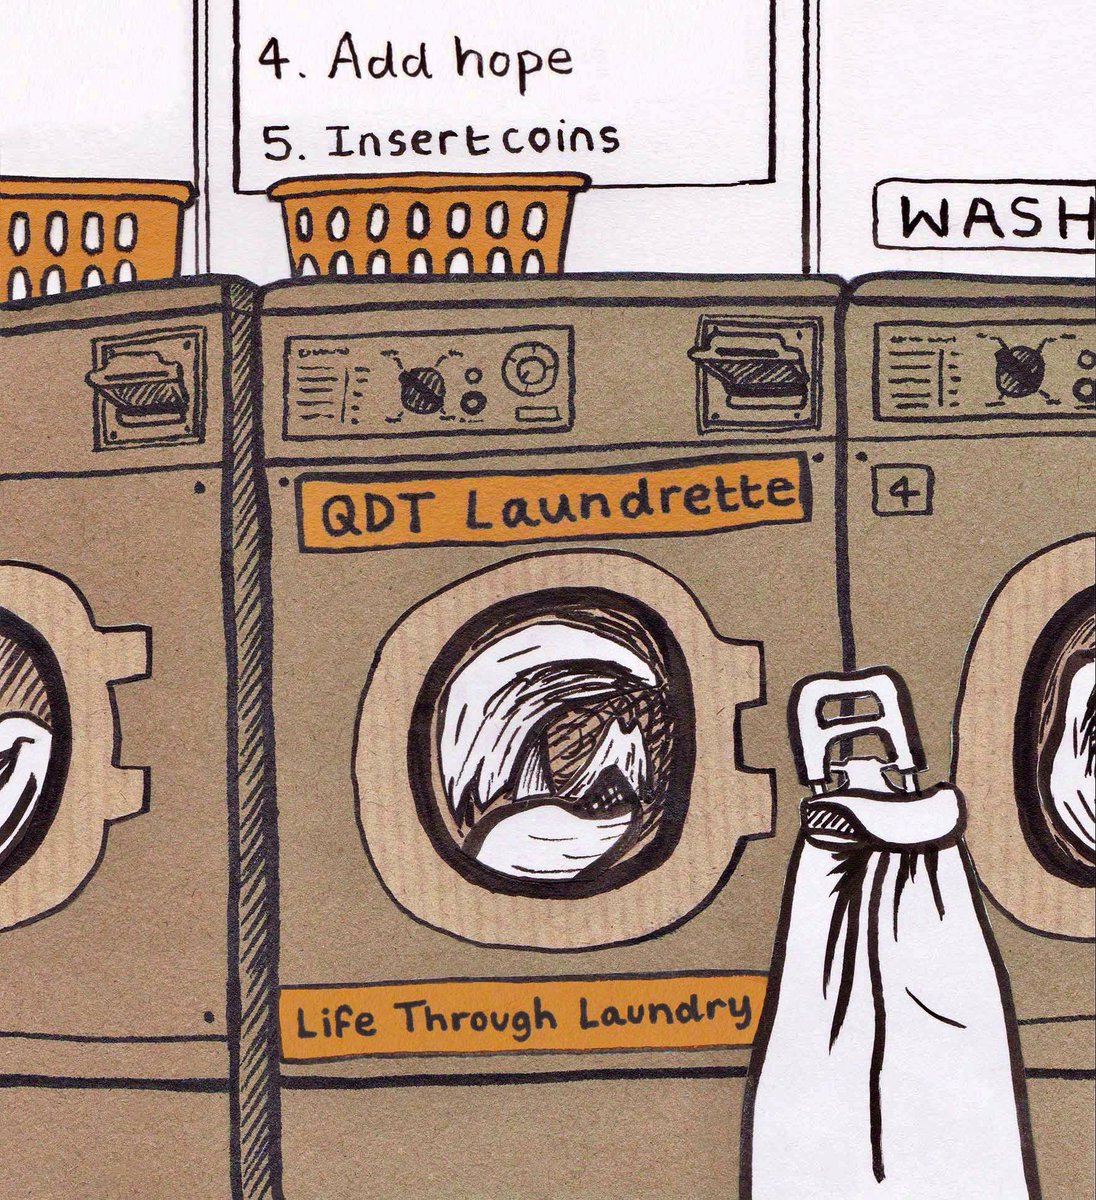 Today we launch Life Through Laundry, building up a picture of communities through the lens of the laundrette, with @historicengland’s High Streets Cultural Programme, a nationwide initiative to unlock the potential of high streets 👉 bit.ly/3tMLyOO
 #HistoricHighStreets